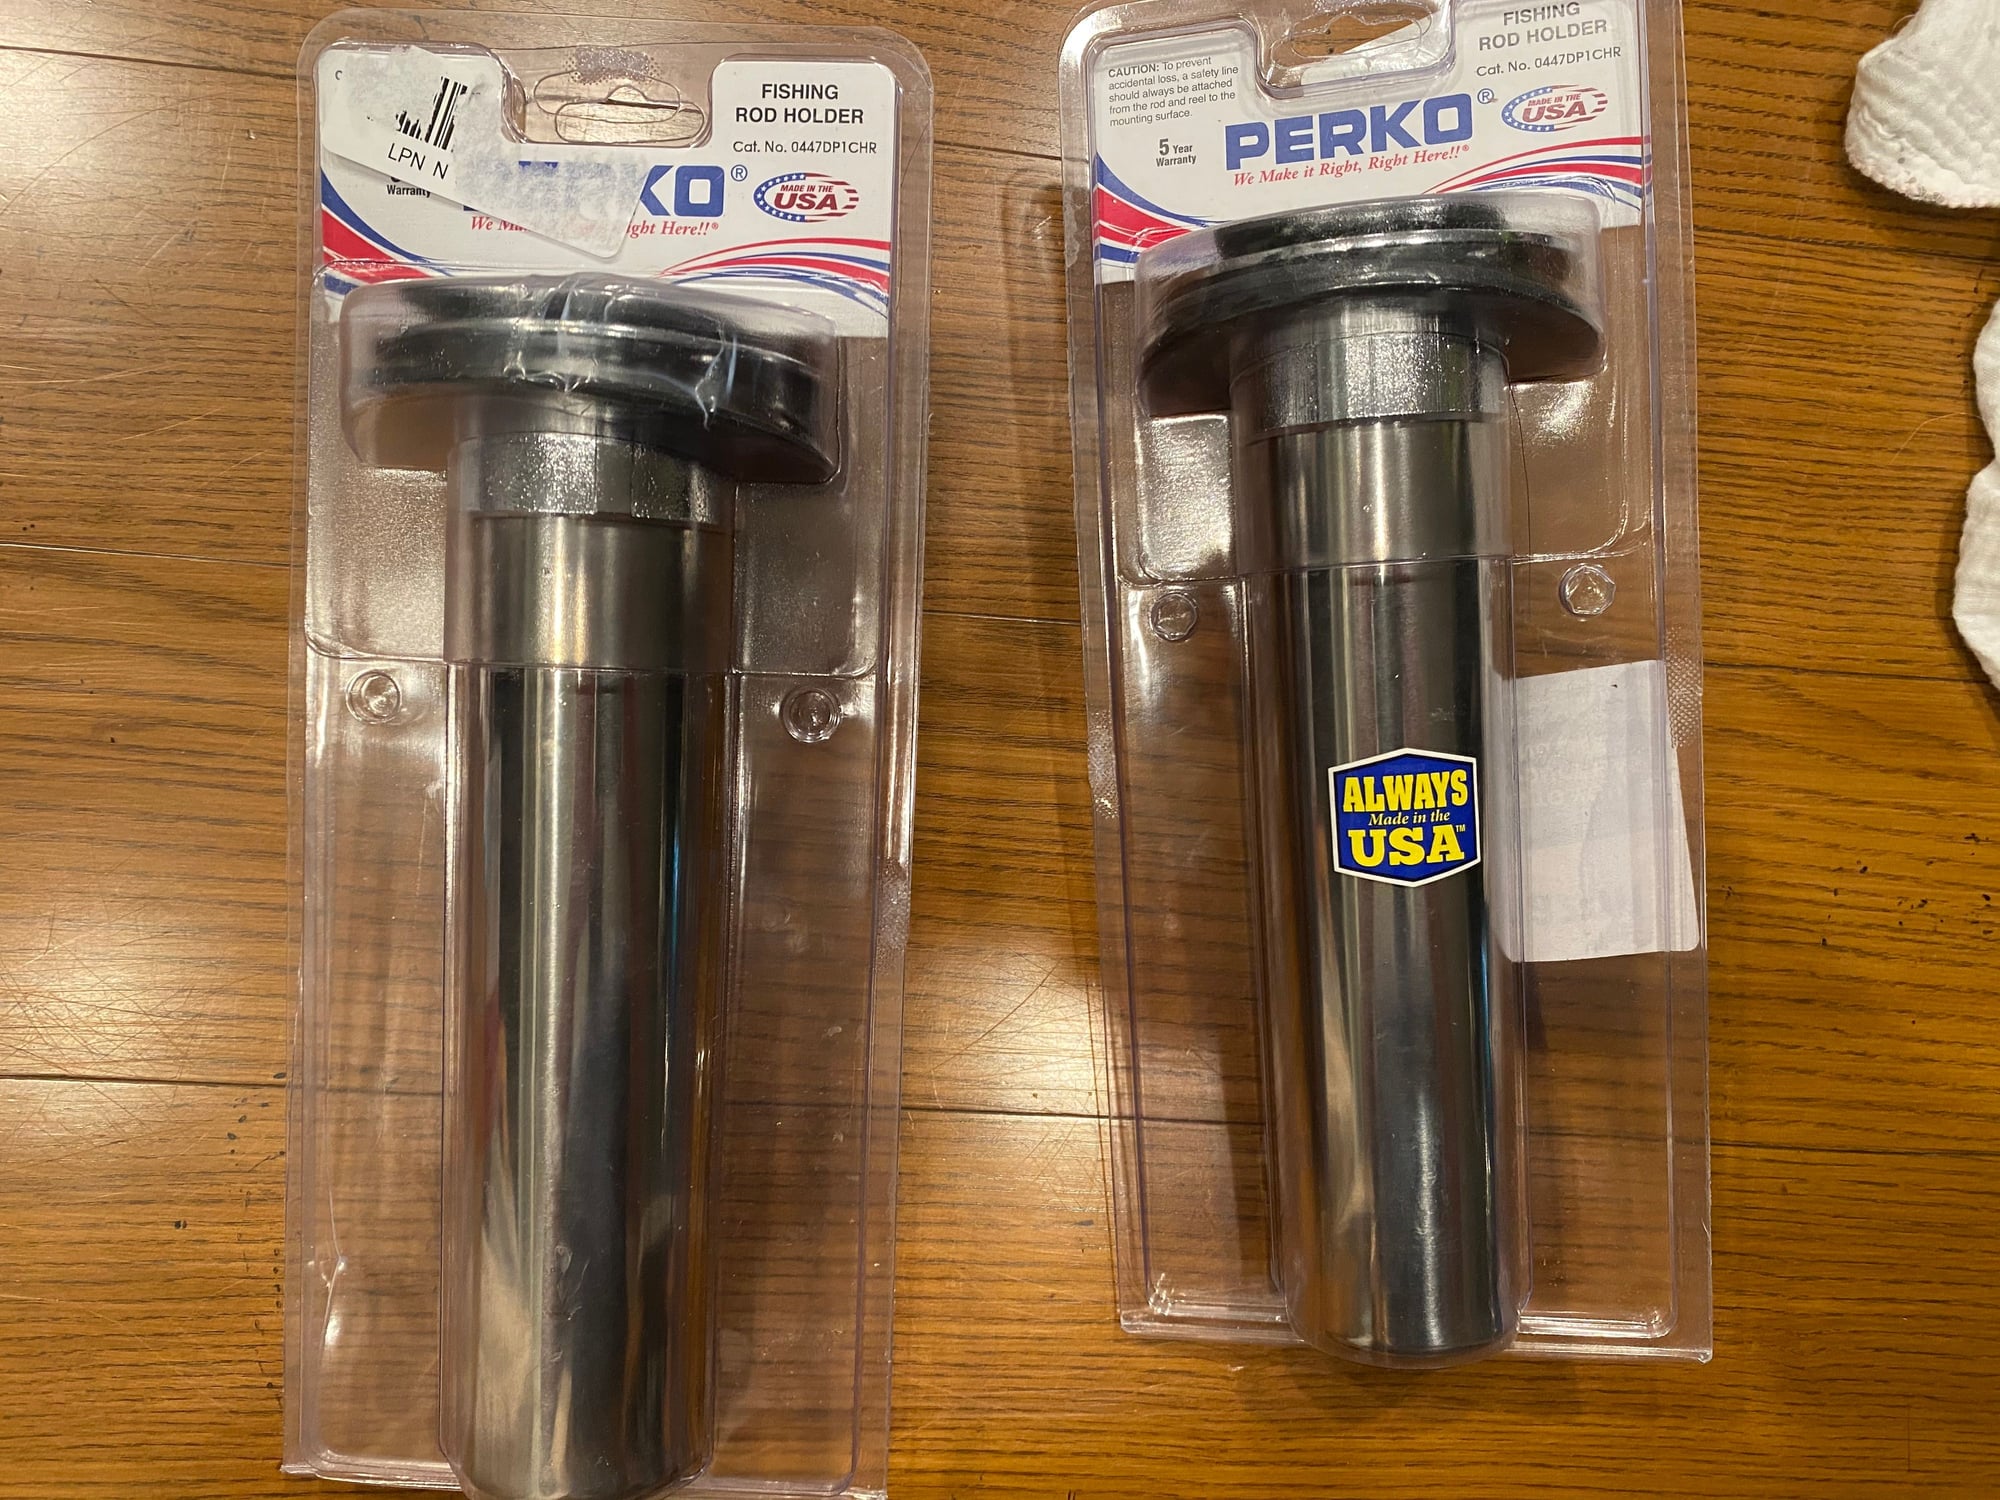 Perko rod holders - The Hull Truth - Boating and Fishing Forum